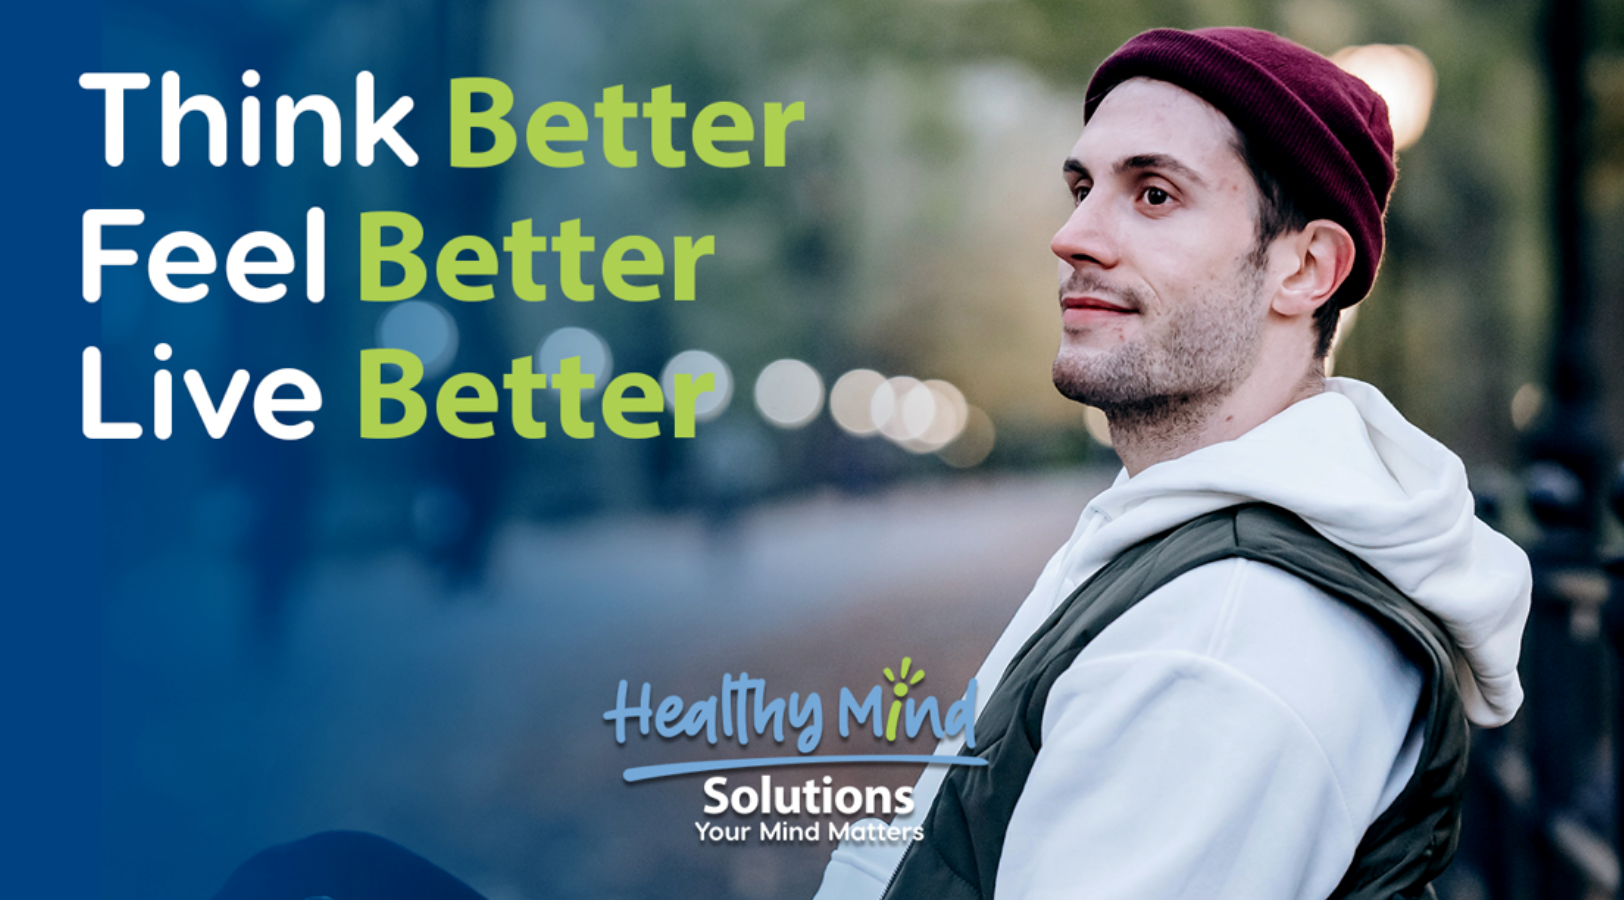 healthy mind solutions - think better, feel better, live better